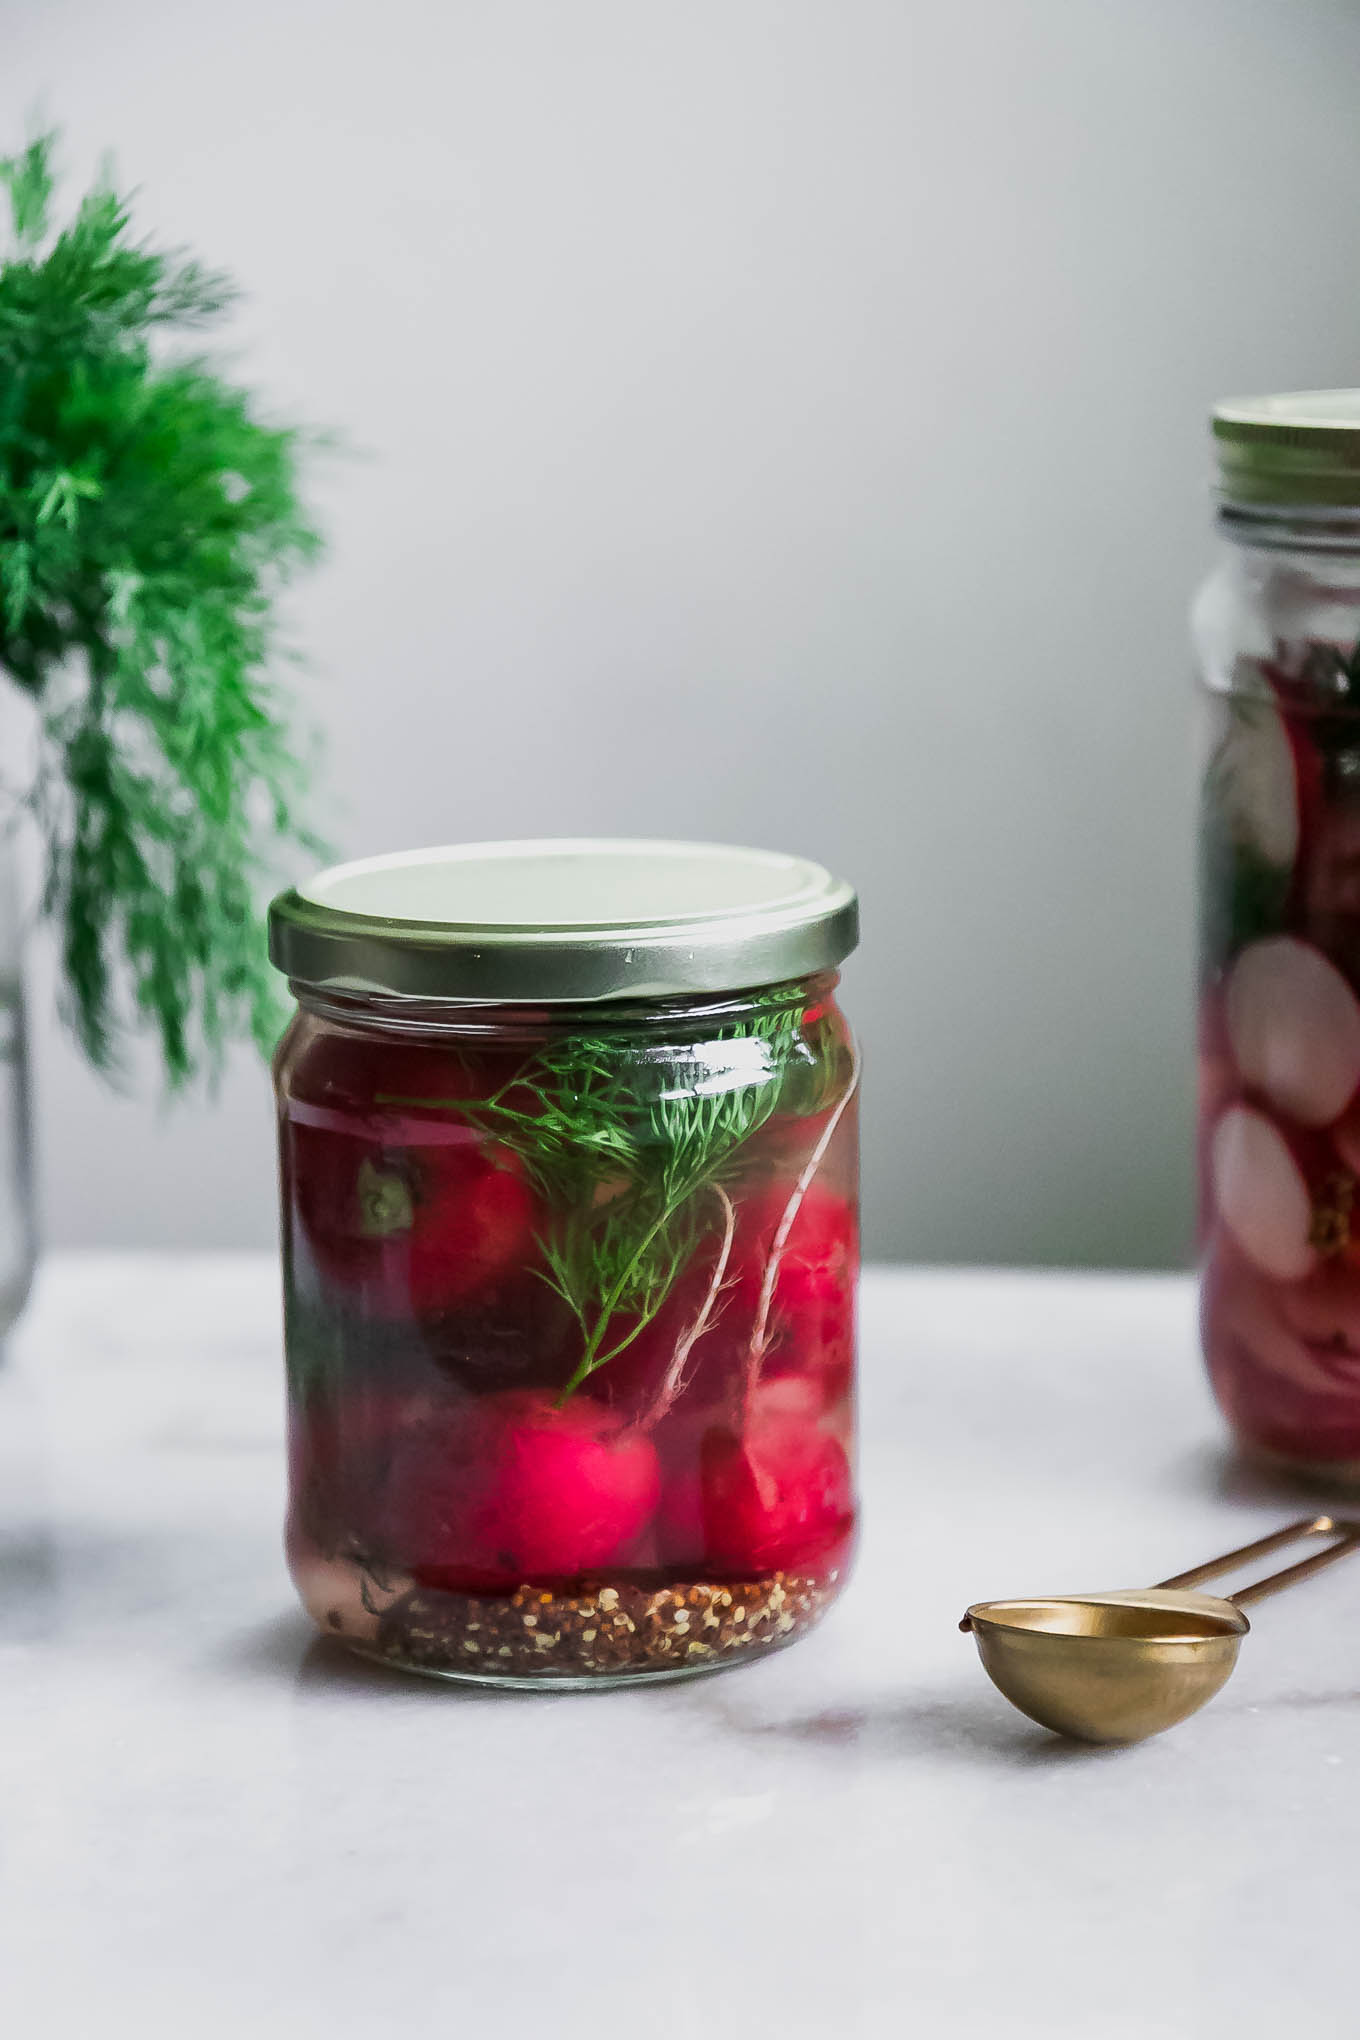 Quick Dill Pickled Radishes ⋆ Refrigerator Pickled Radishes with Fresh Dill